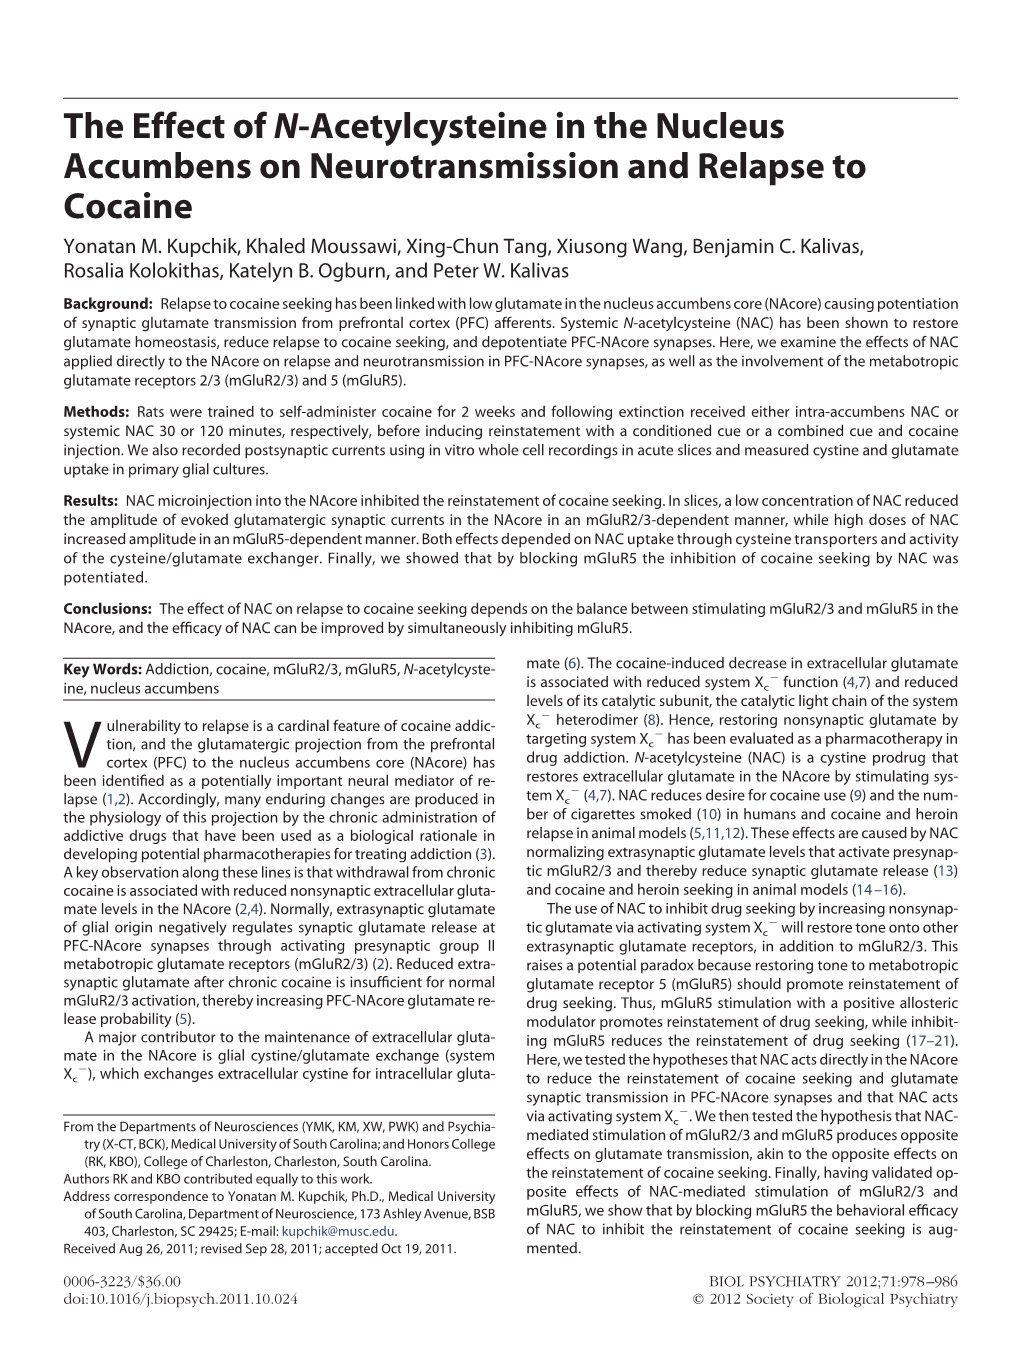 The Effect of N-Acetylcysteine in the Nucleus Accumbens on Neurotransmission and Relapse to Cocaine Yonatan M